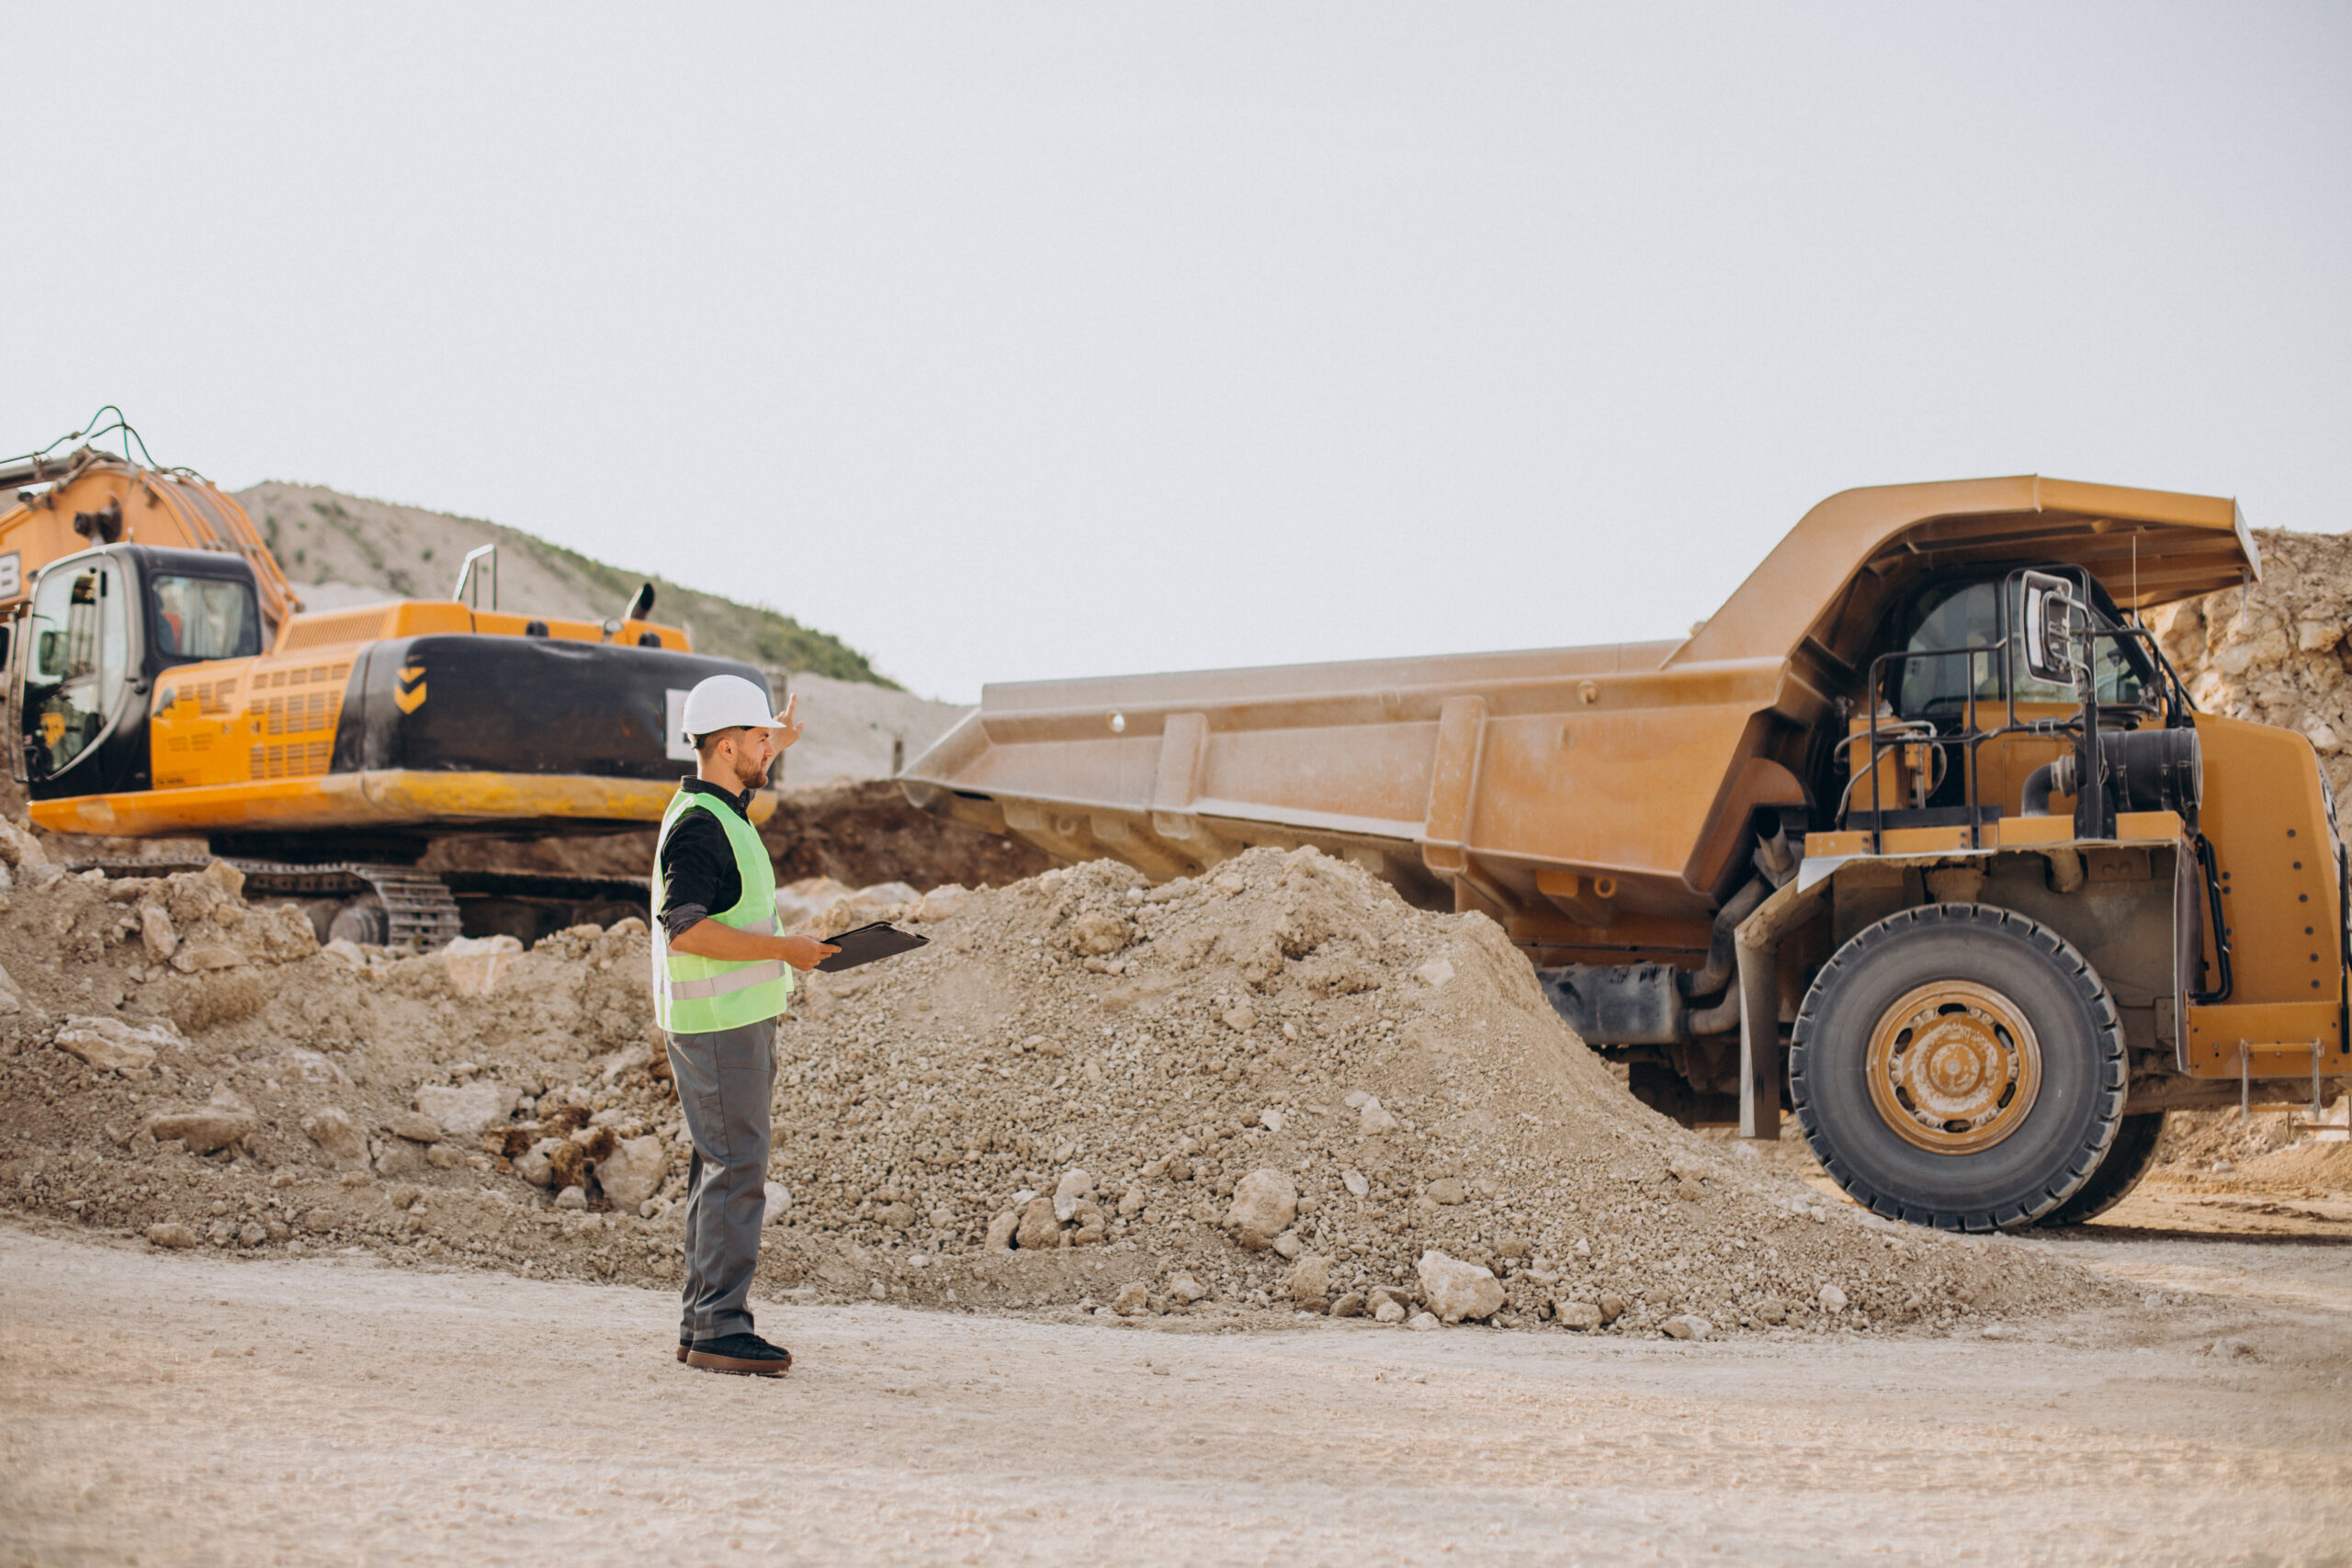 HSB Resources provides simplified safety solutions